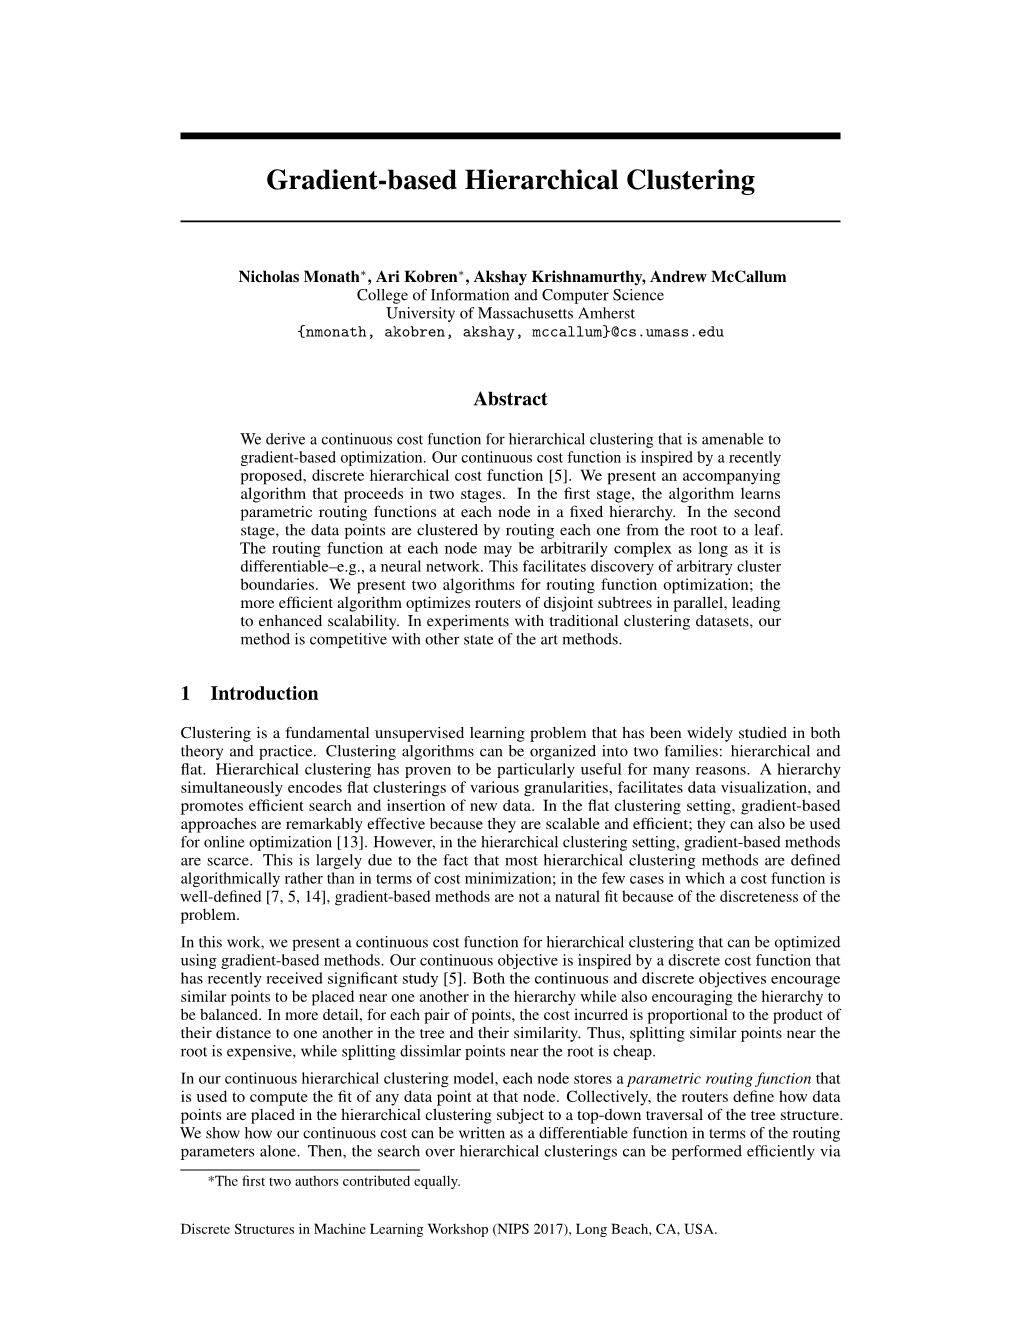 Gradient-Based Hierarchical Clustering